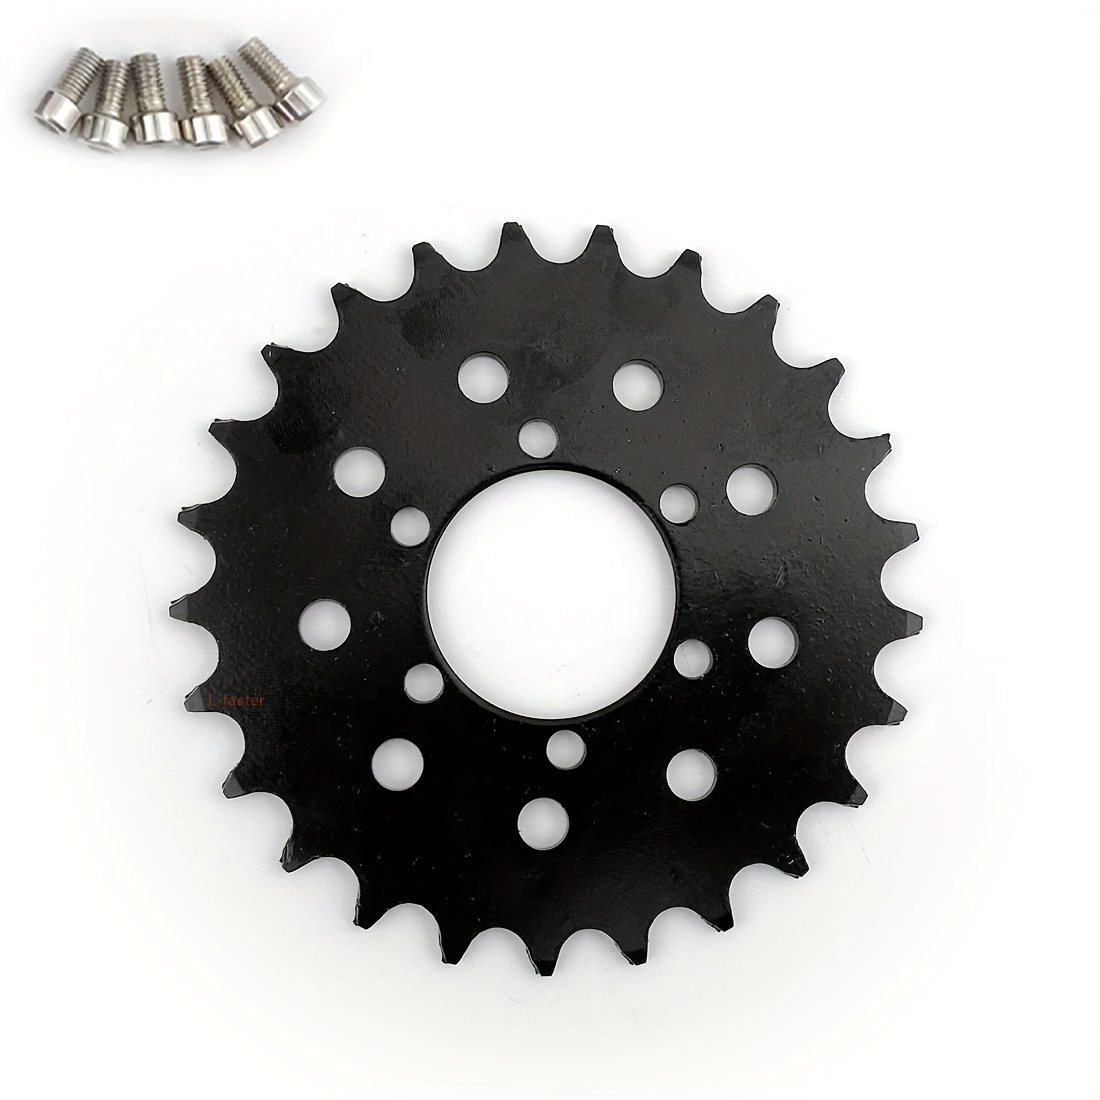 

16t 25t 28t 32t Fixed Gear Replacement Disc Brake With Bolts- Fixed Single Speed Chain Wheel For Bicycle Chain